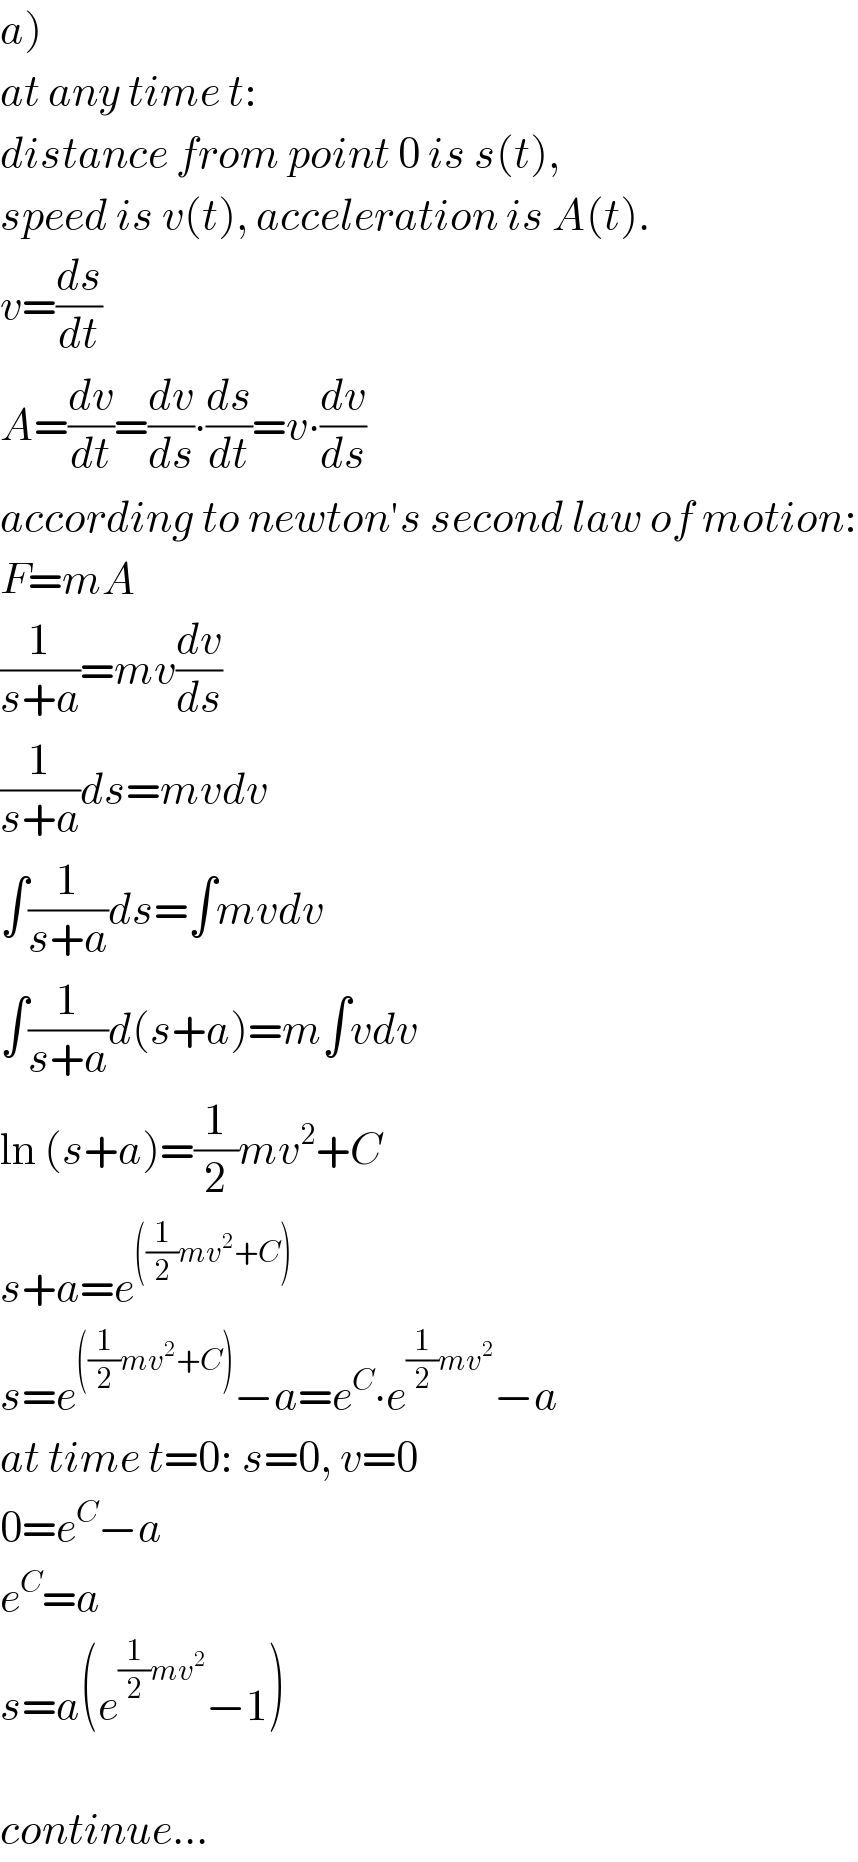 a)  at any time t:  distance from point 0 is s(t),   speed is v(t), acceleration is A(t).  v=(ds/dt)  A=(dv/dt)=(dv/ds)∙(ds/dt)=v∙(dv/ds)  according to newton′s second law of motion:  F=mA  (1/(s+a))=mv(dv/ds)  (1/(s+a))ds=mvdv  ∫(1/(s+a))ds=∫mvdv  ∫(1/(s+a))d(s+a)=m∫vdv  ln (s+a)=(1/2)mv^2 +C  s+a=e^(((1/2)mv^2 +C))   s=e^(((1/2)mv^2 +C)) −a=e^C ∙e^((1/2)mv^2 ) −a  at time t=0: s=0, v=0  0=e^C −a  e^C =a  s=a(e^((1/2)mv^2 ) −1)    continue...  